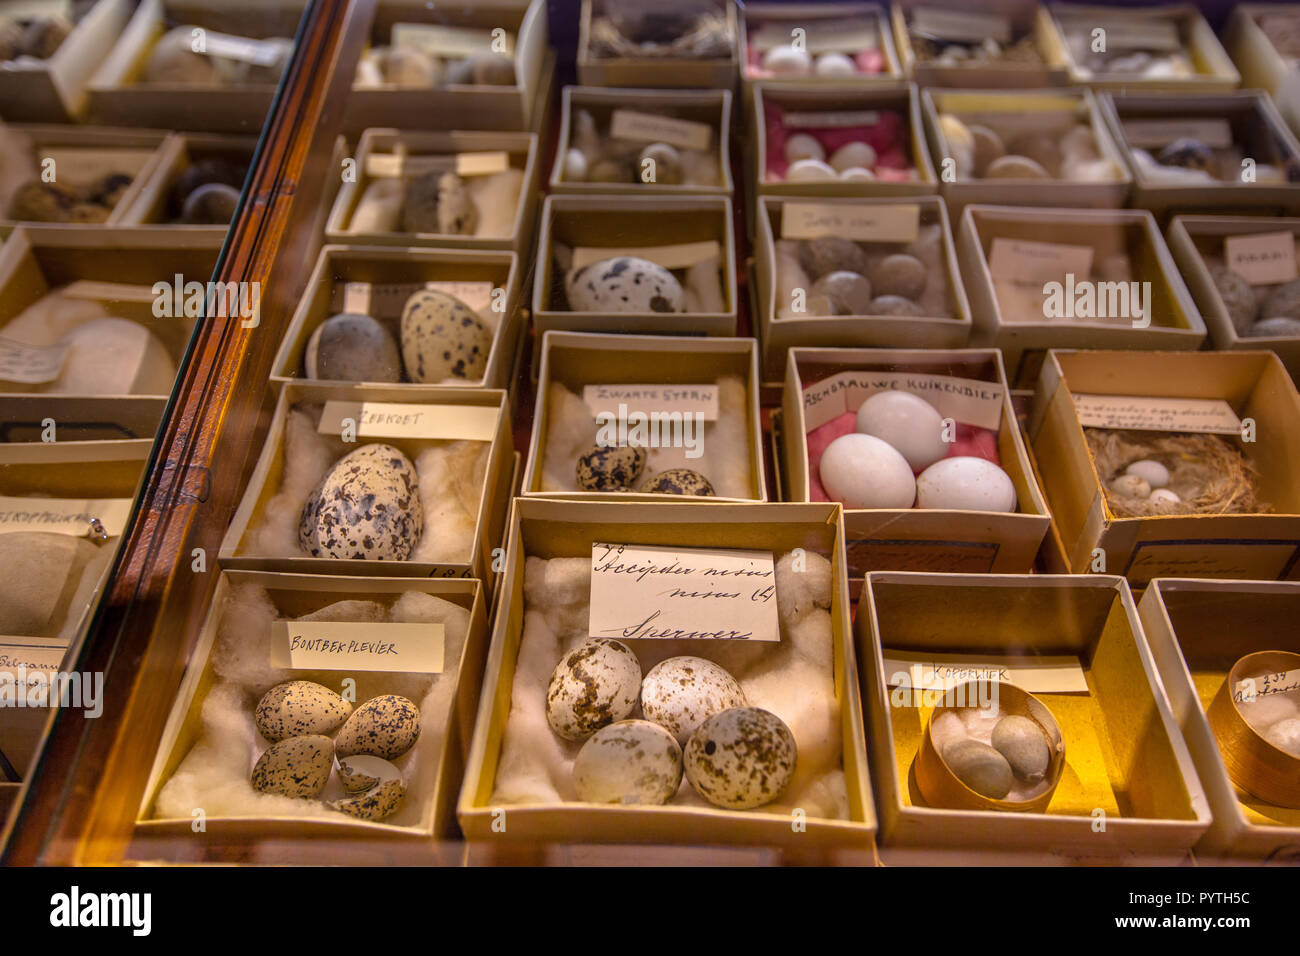 DENEKAMP, NETHERLANDS - JULY 25, 2016: Museum of natural history Natura Docet with show case with eggs of various bird species Stock Photo